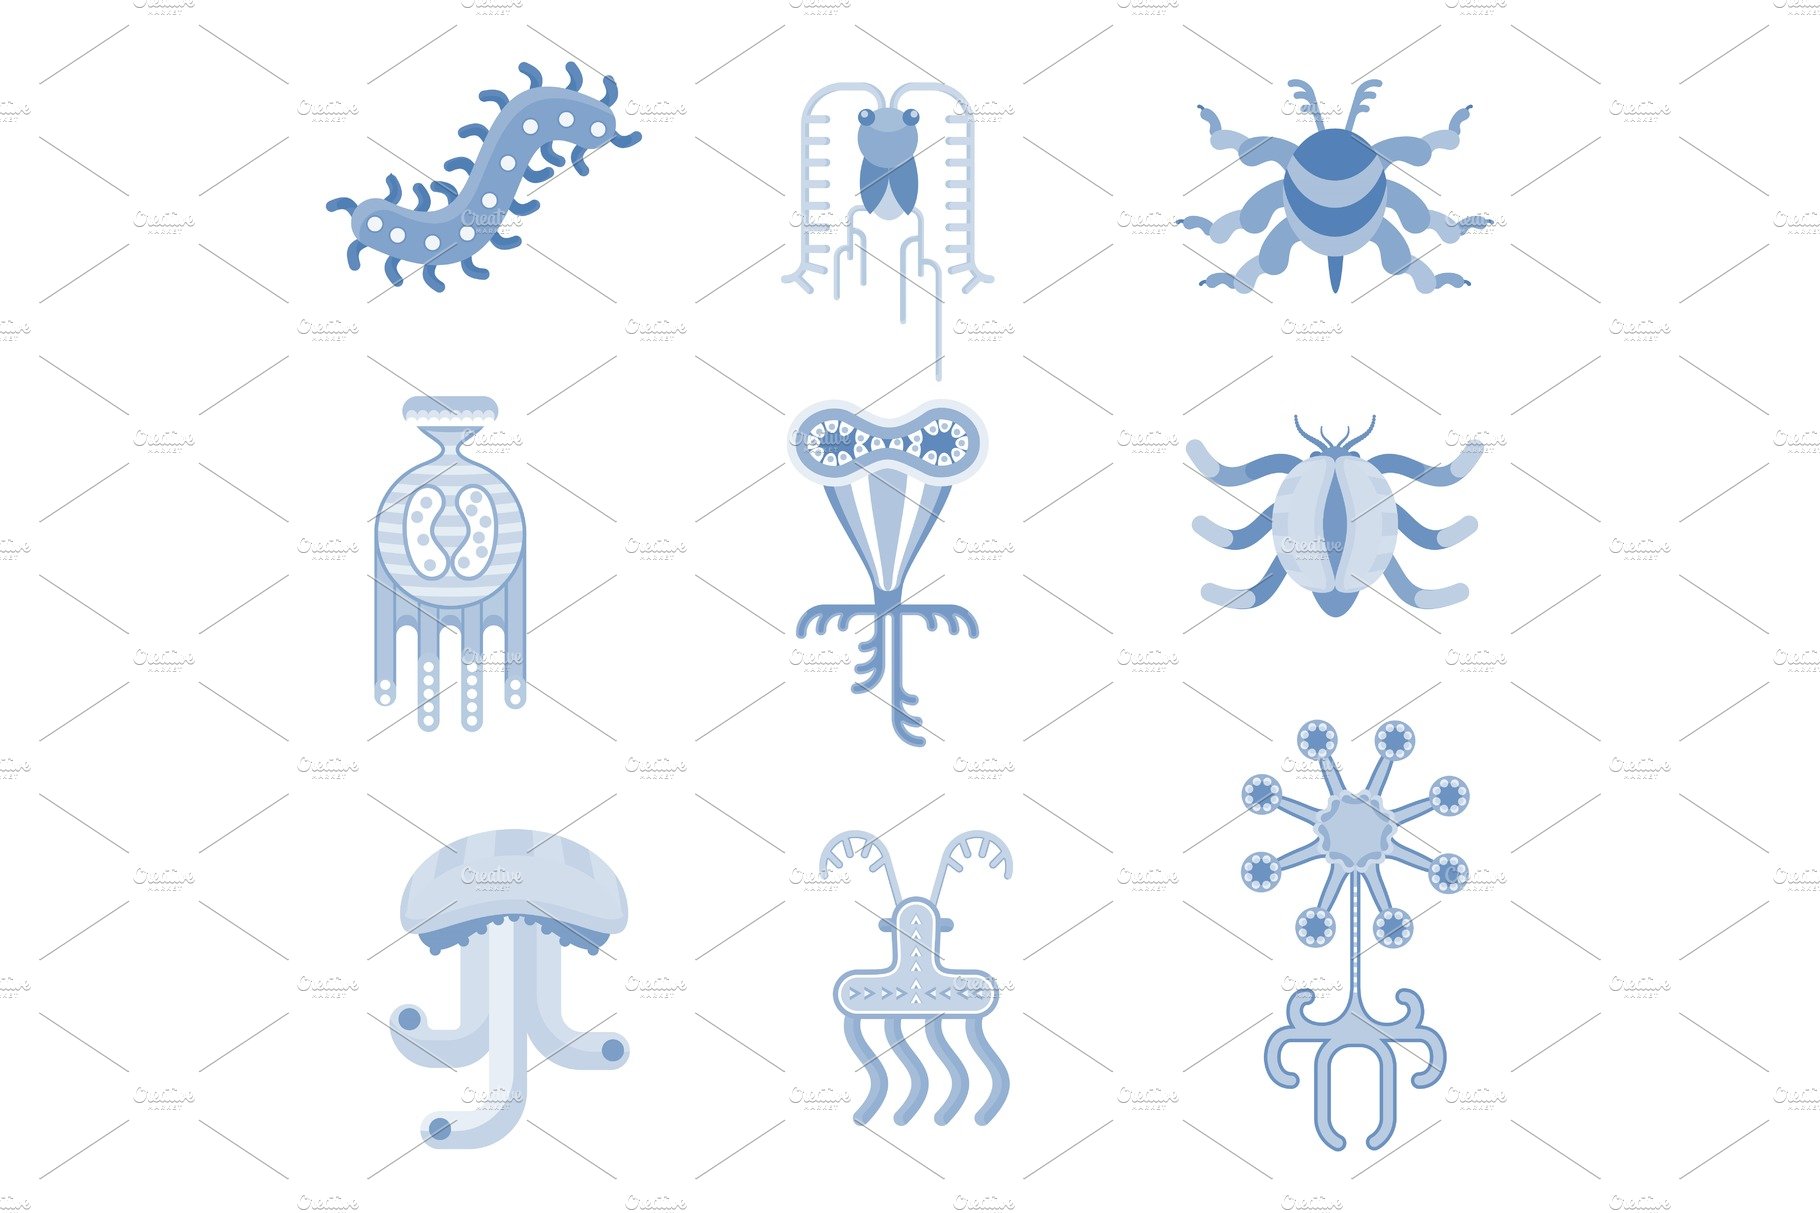 microorganism icon set cover image.